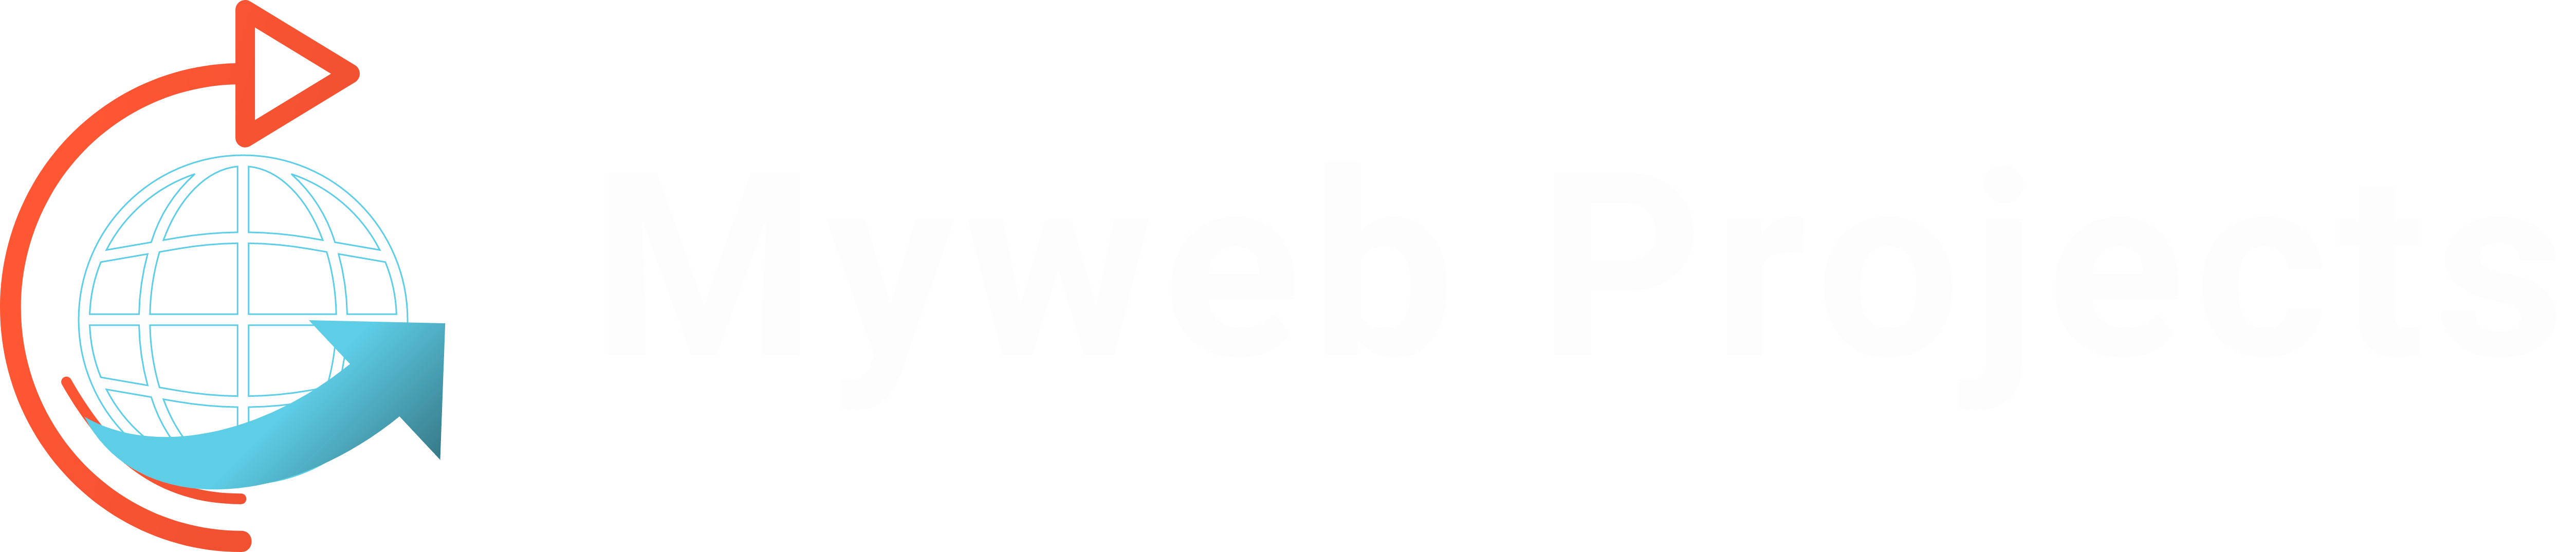 Myweb Projects